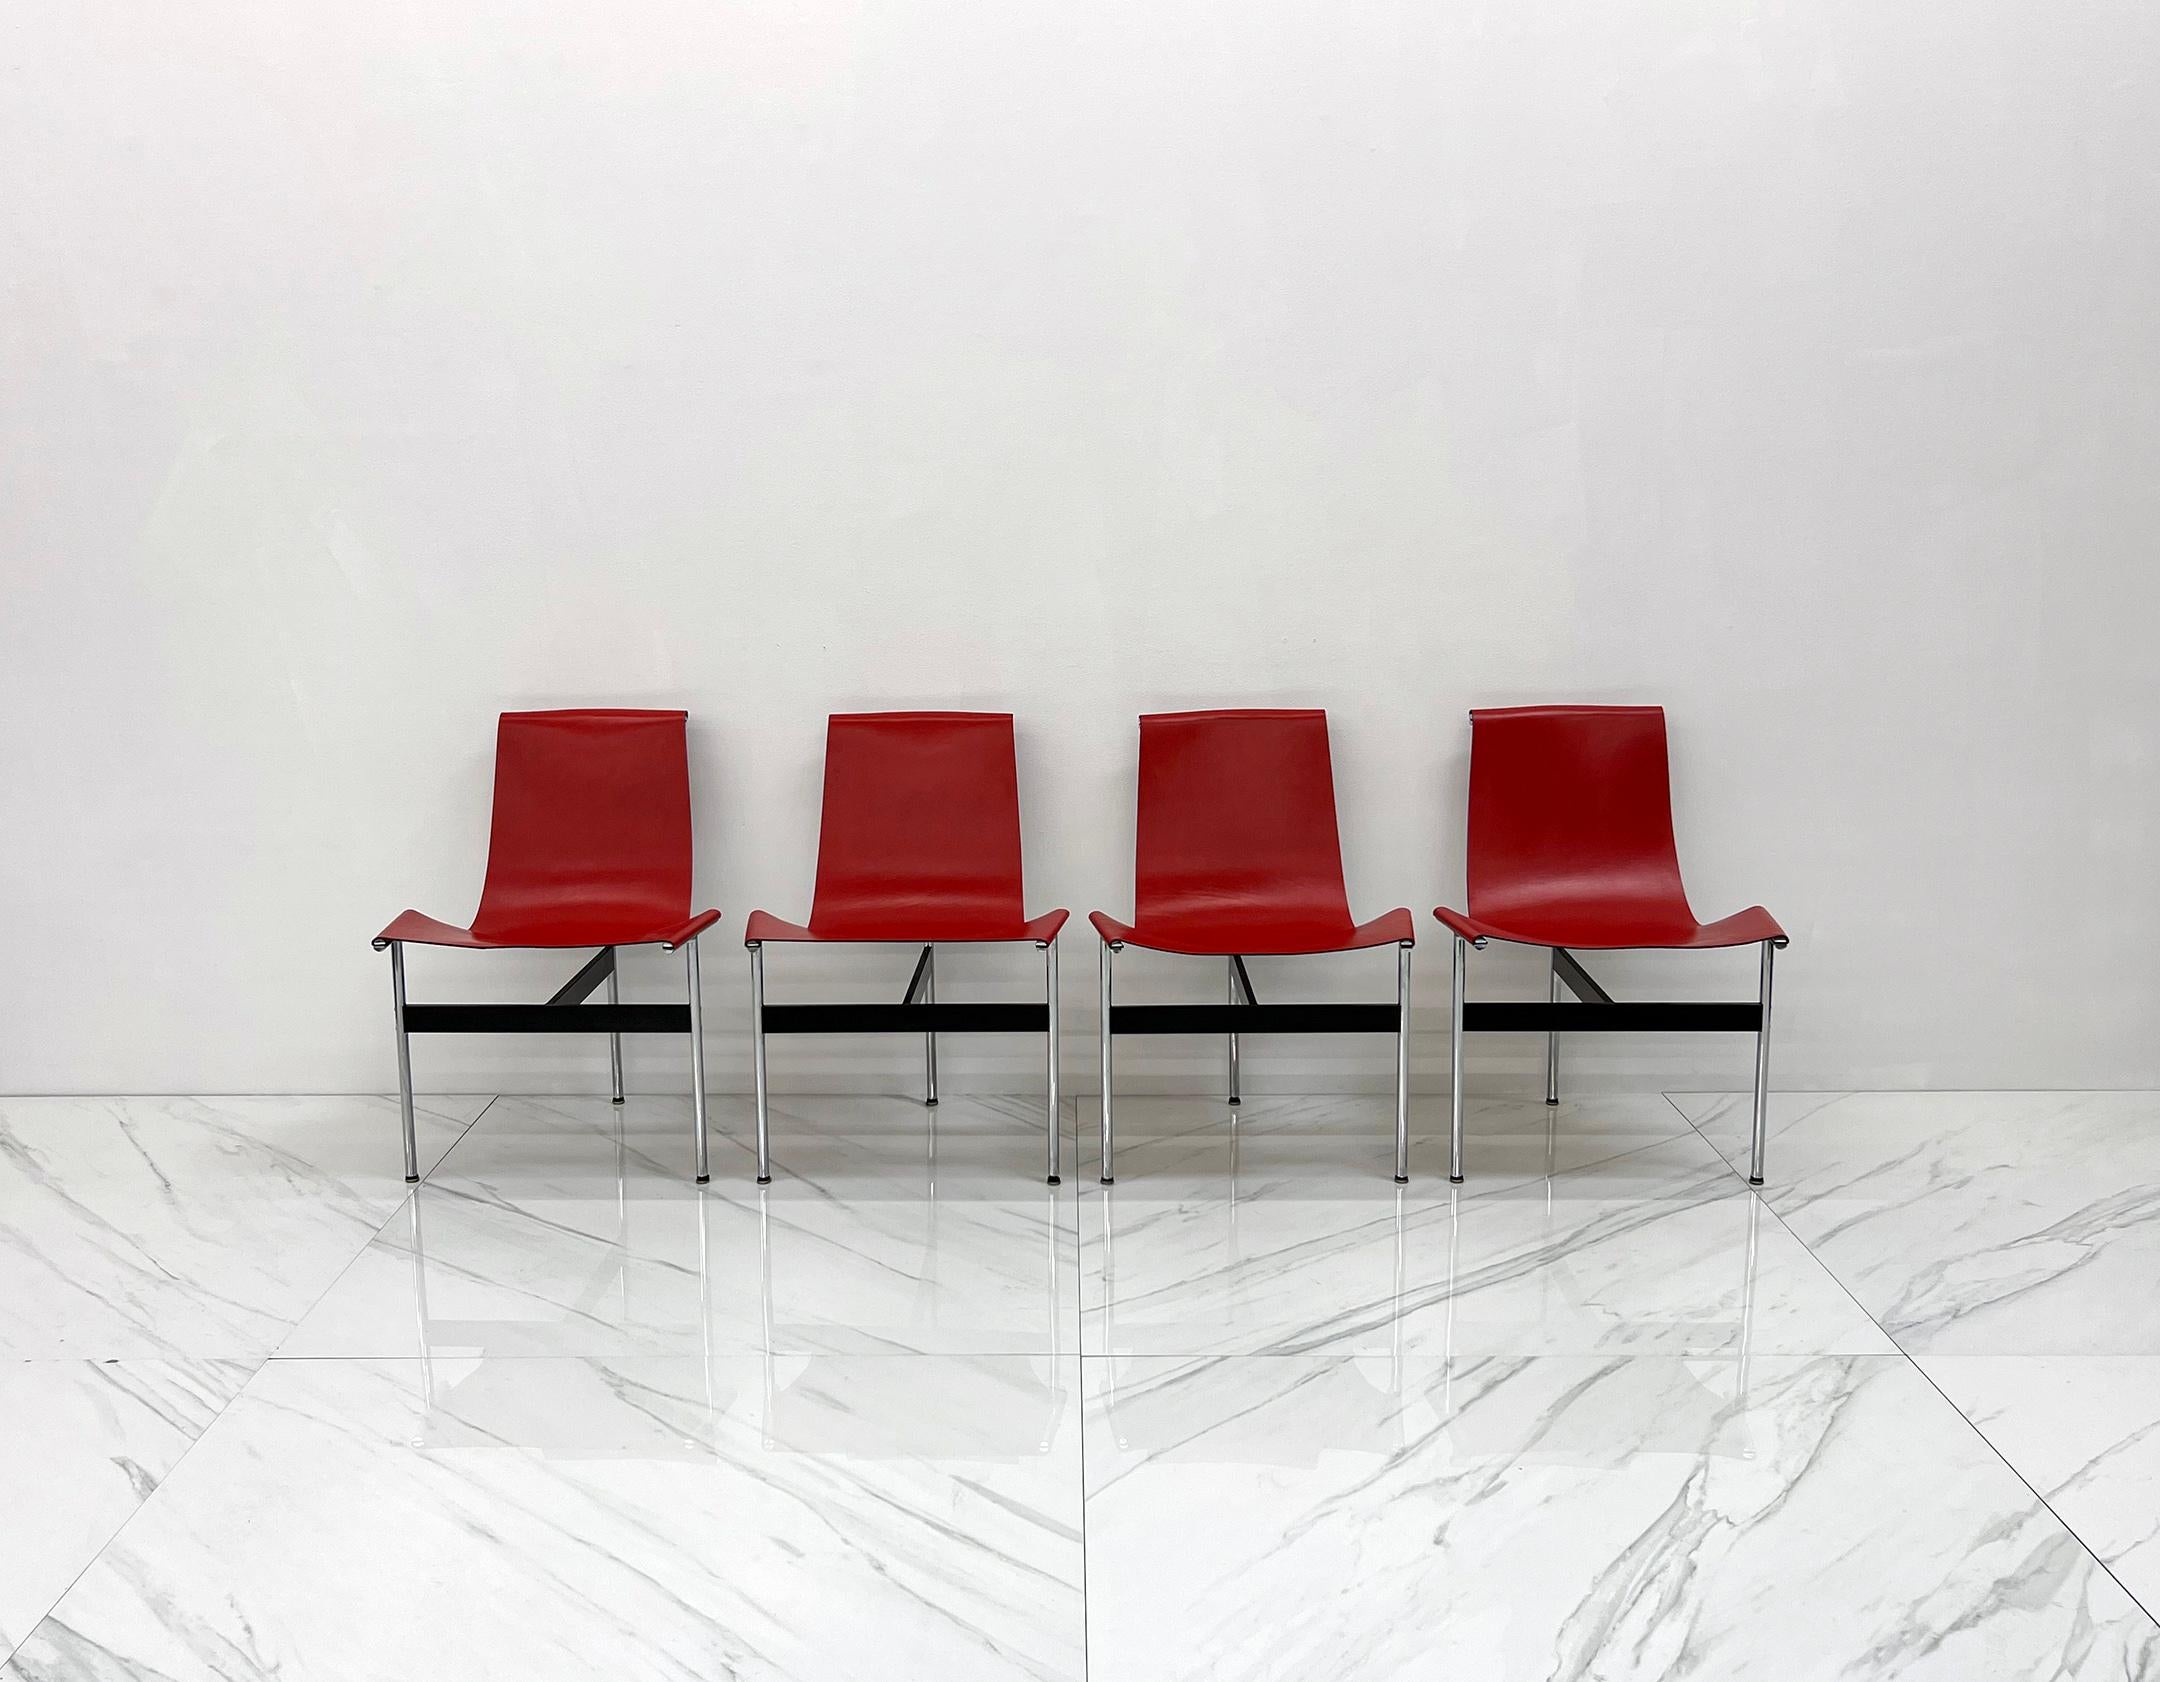 Available right now we have a set of 4 red leather, buttery soft, oh-so stylish Katavolos, Kelley and Littell sling chairs for Laverne, 1960s. These iconic chairs feature a black T bracket, polished steel legs, and red leather sling seat. These